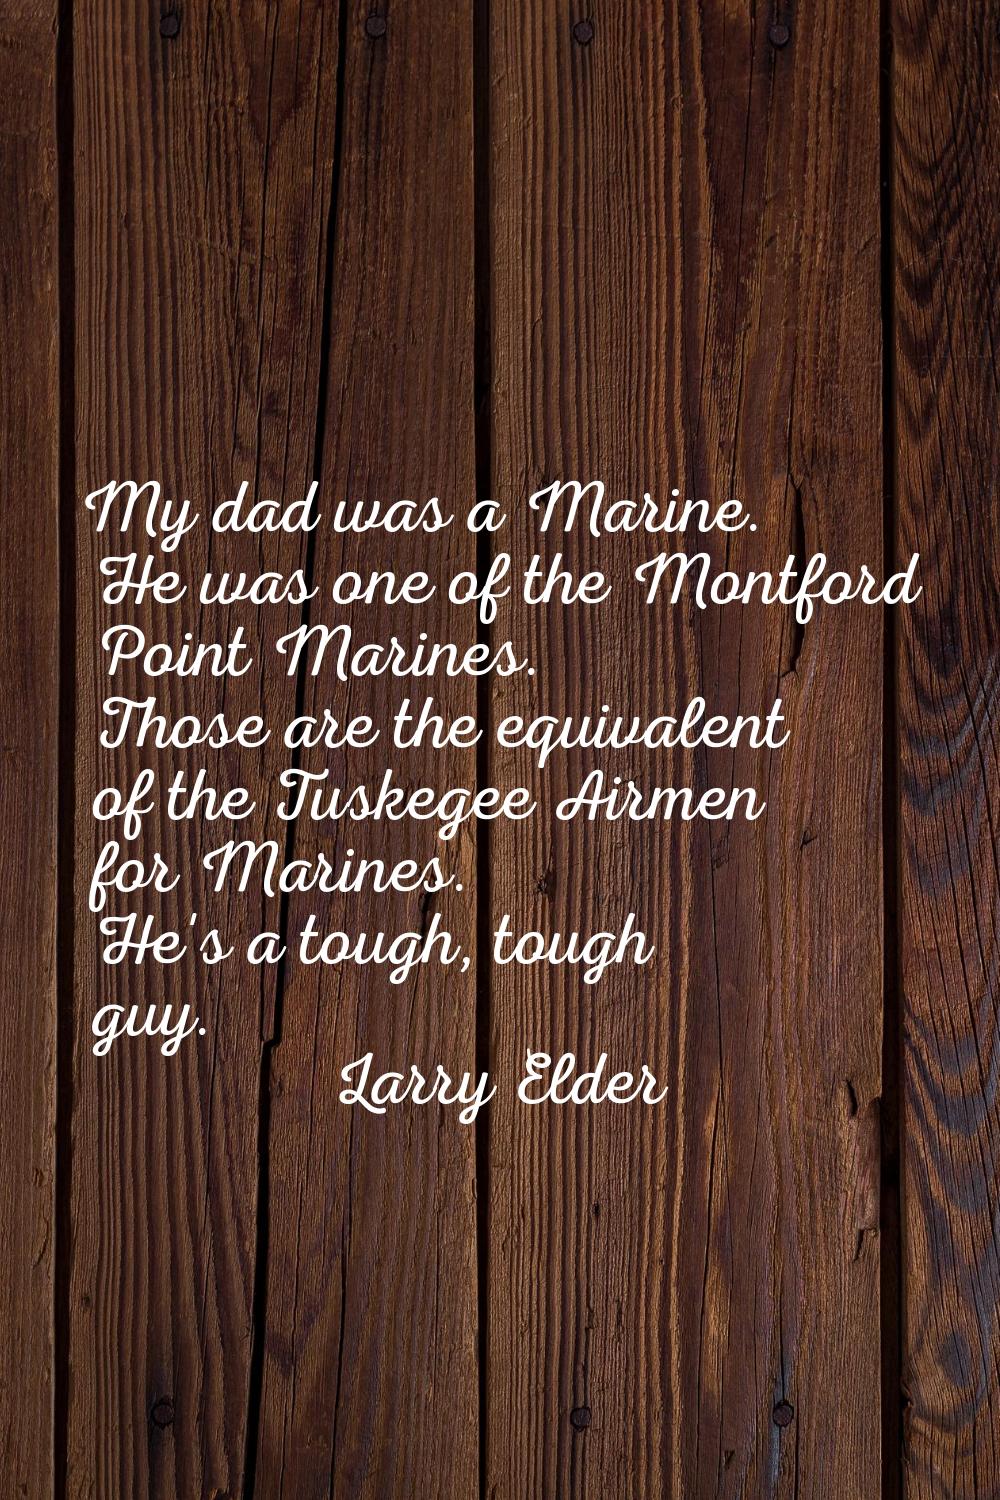 My dad was a Marine. He was one of the Montford Point Marines. Those are the equivalent of the Tusk